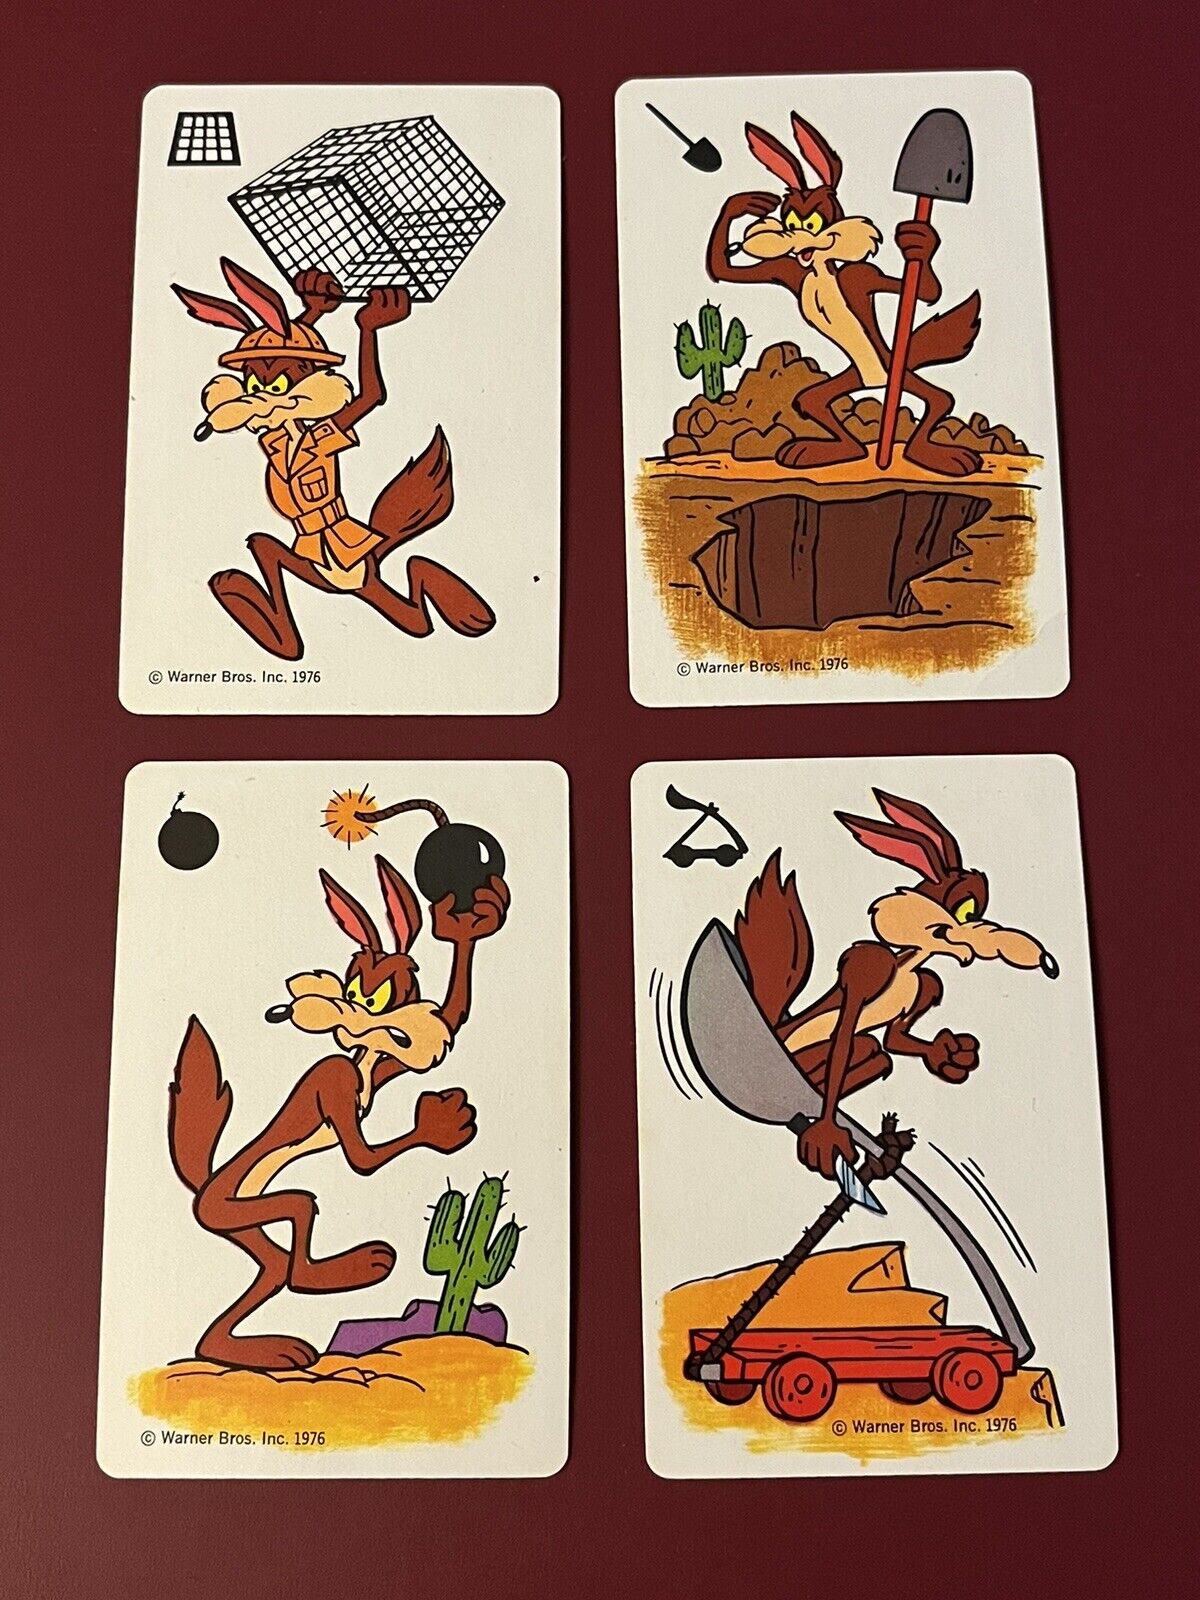 LOT OF 4 VINTAGE 1976  WARNER BROS. INC. PLAYING CARDS  WILE E. COYOTE